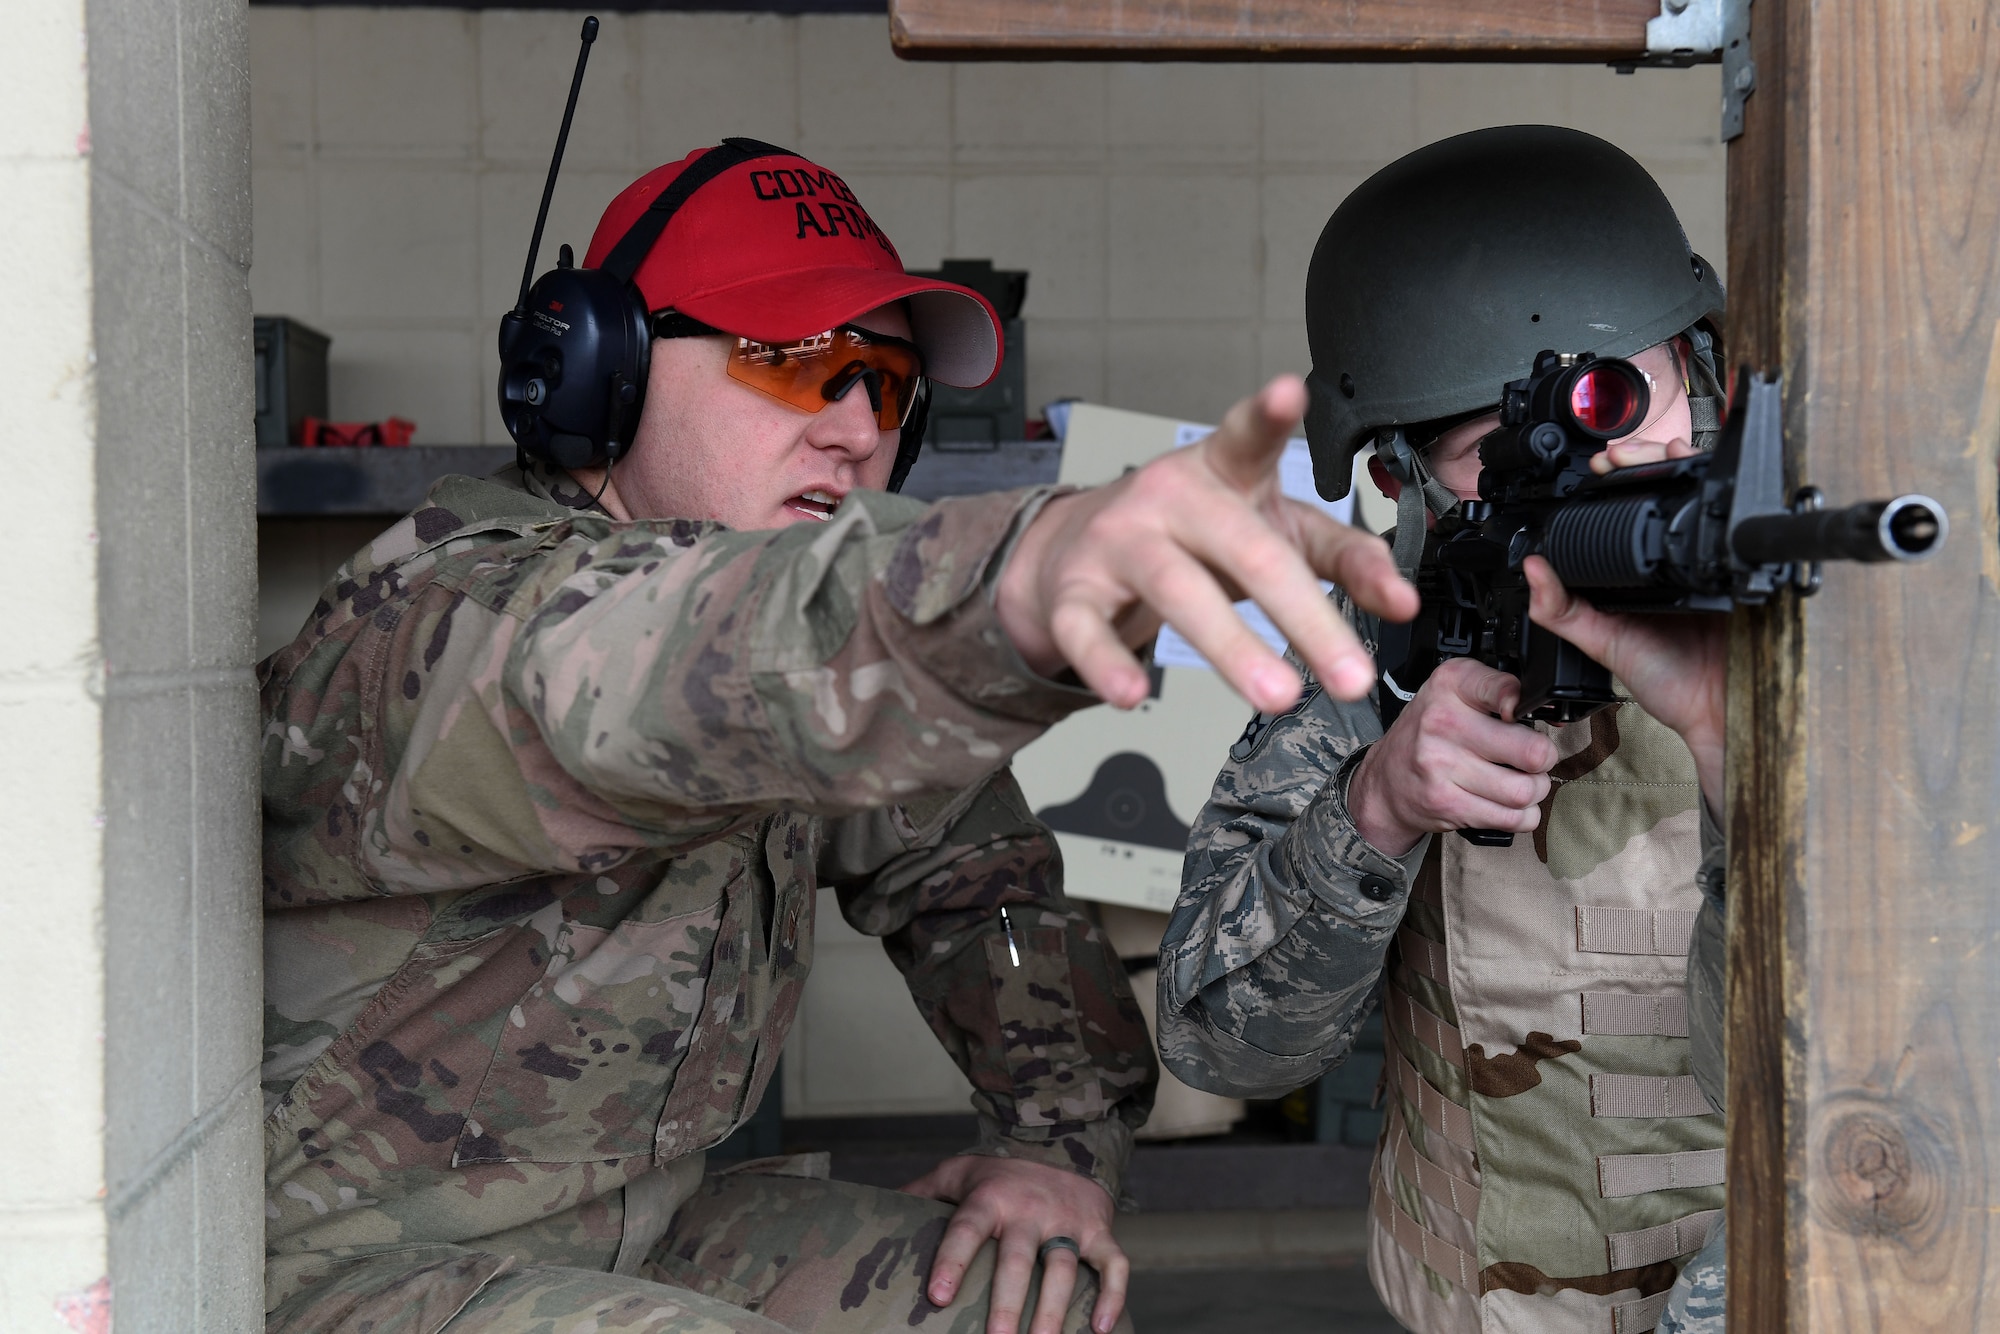 A man on the left of the photo points out of frame, while a man on the right of the photo aims his weapon in that direction.